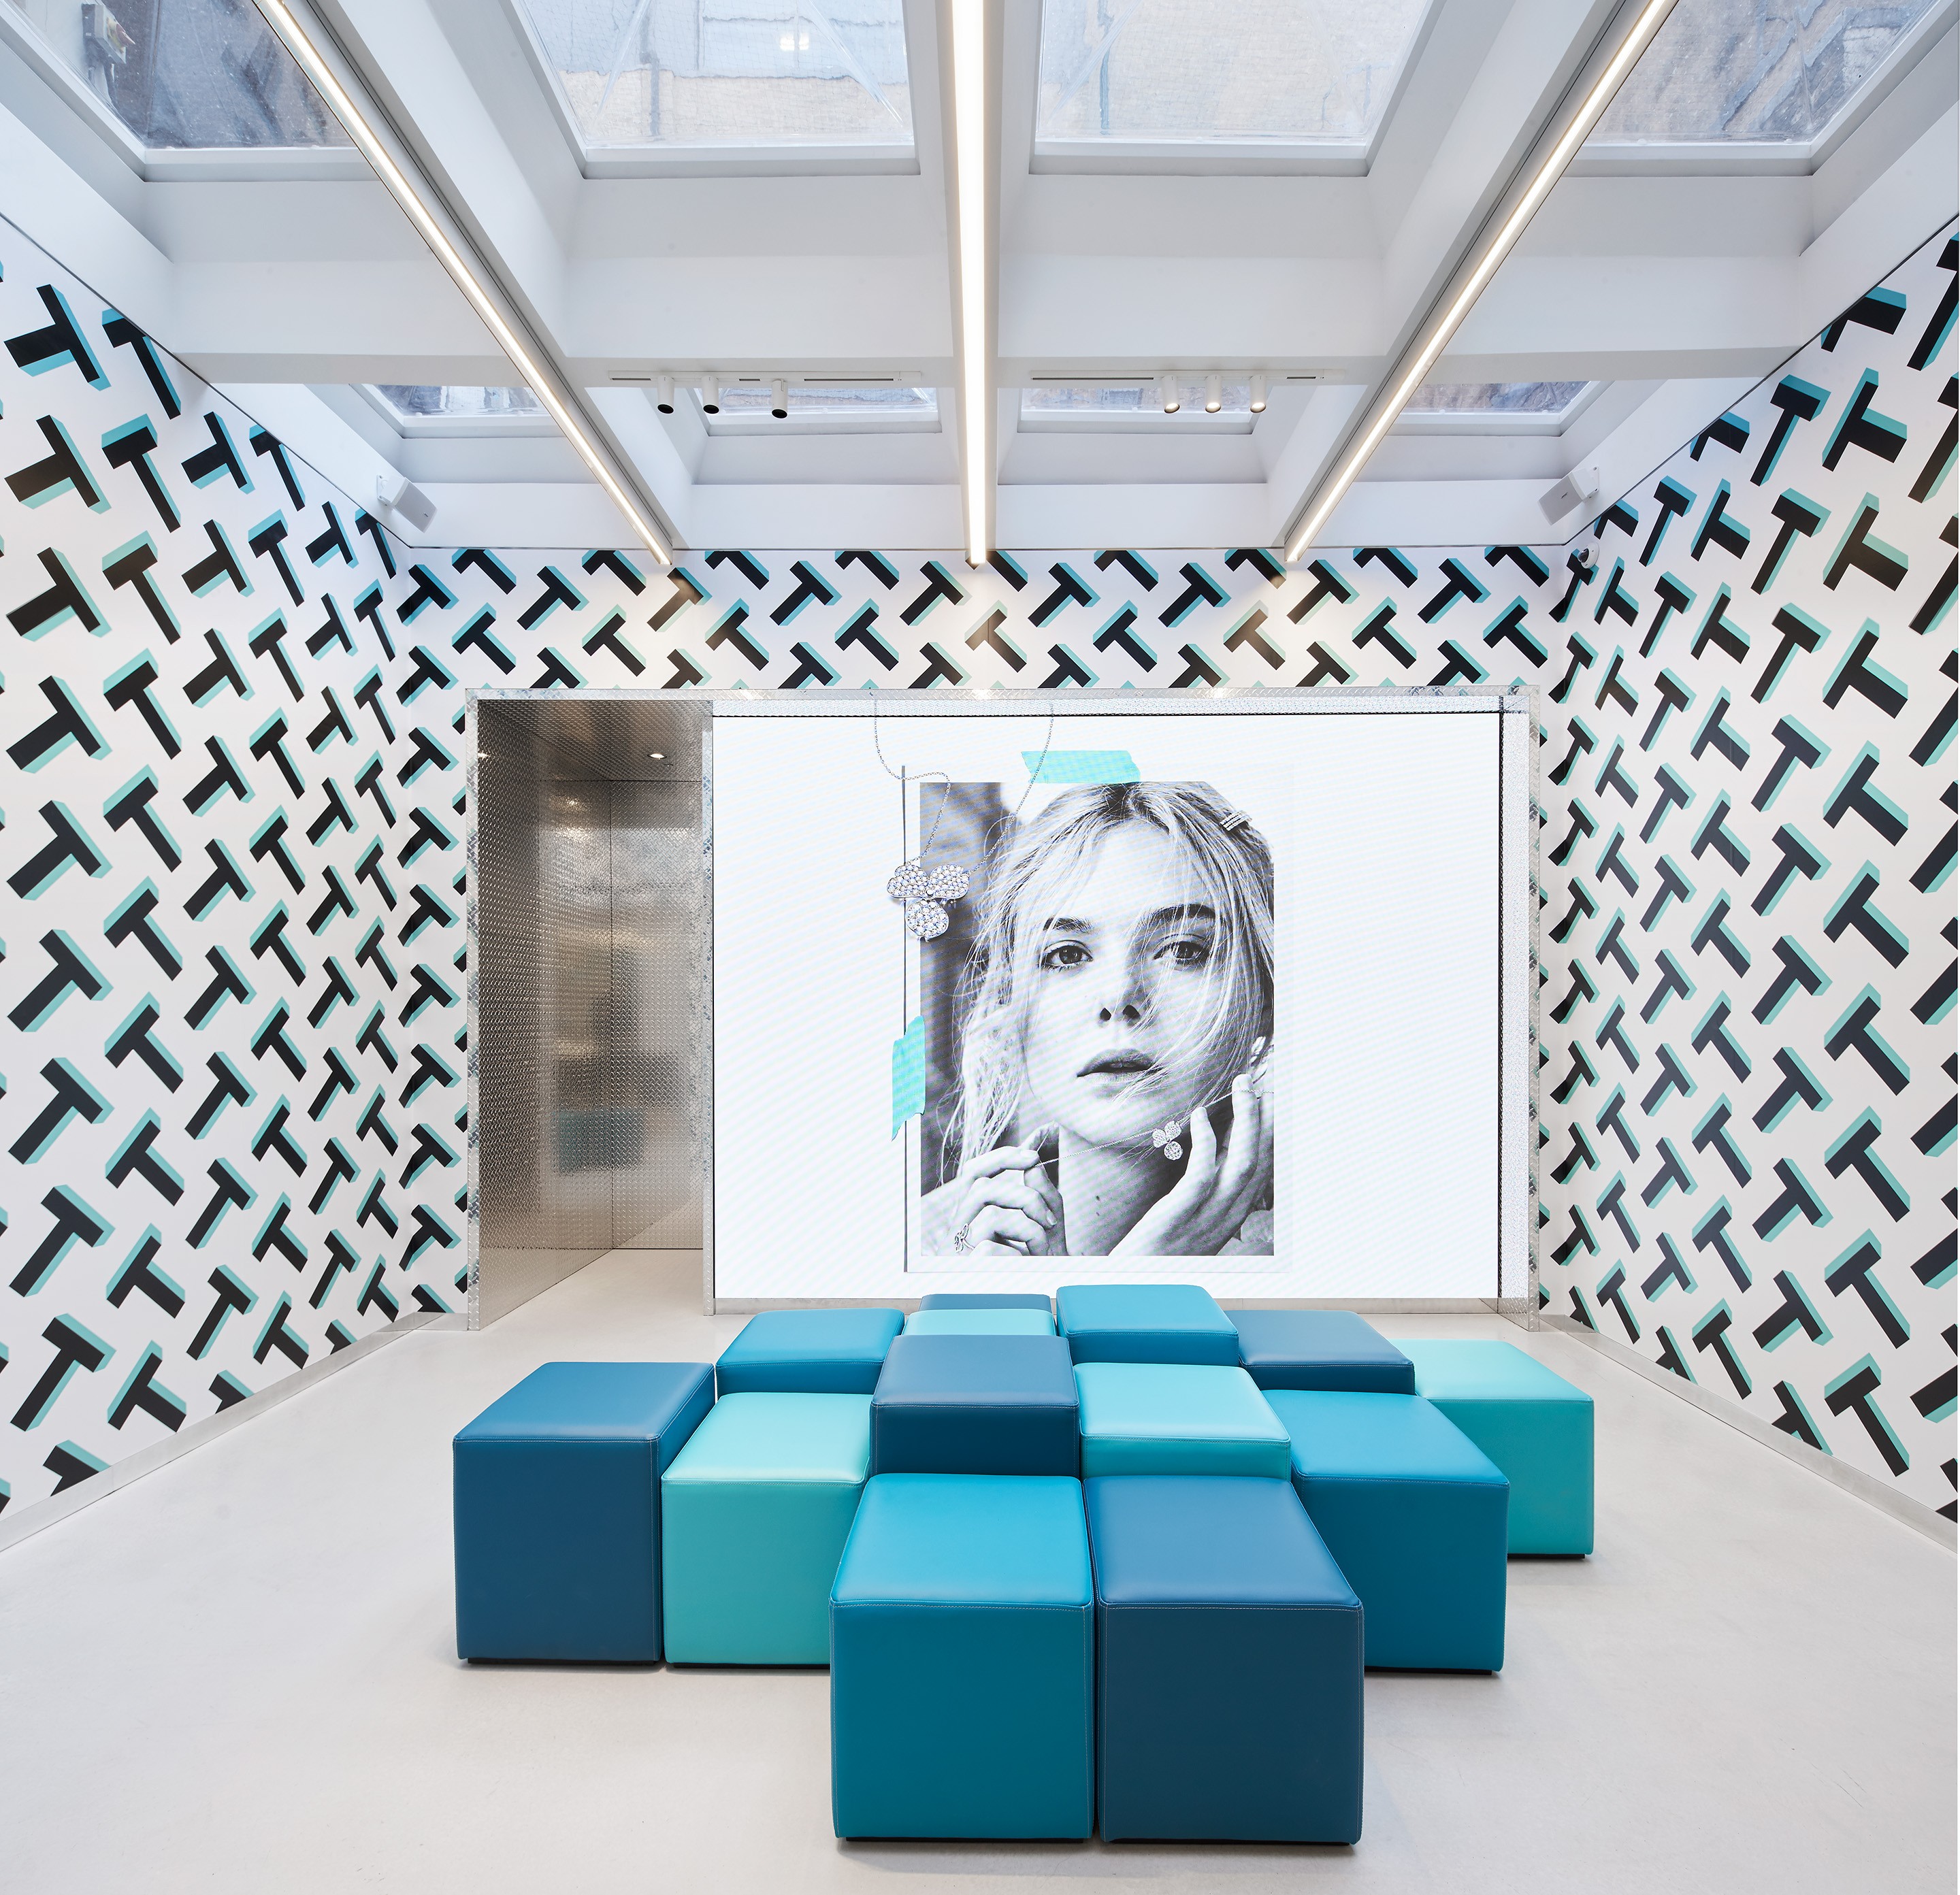 Tiffany & Co.’s Style Studio in Covent Garden, London. It features bold design aesthetics and is very Instagrammable.